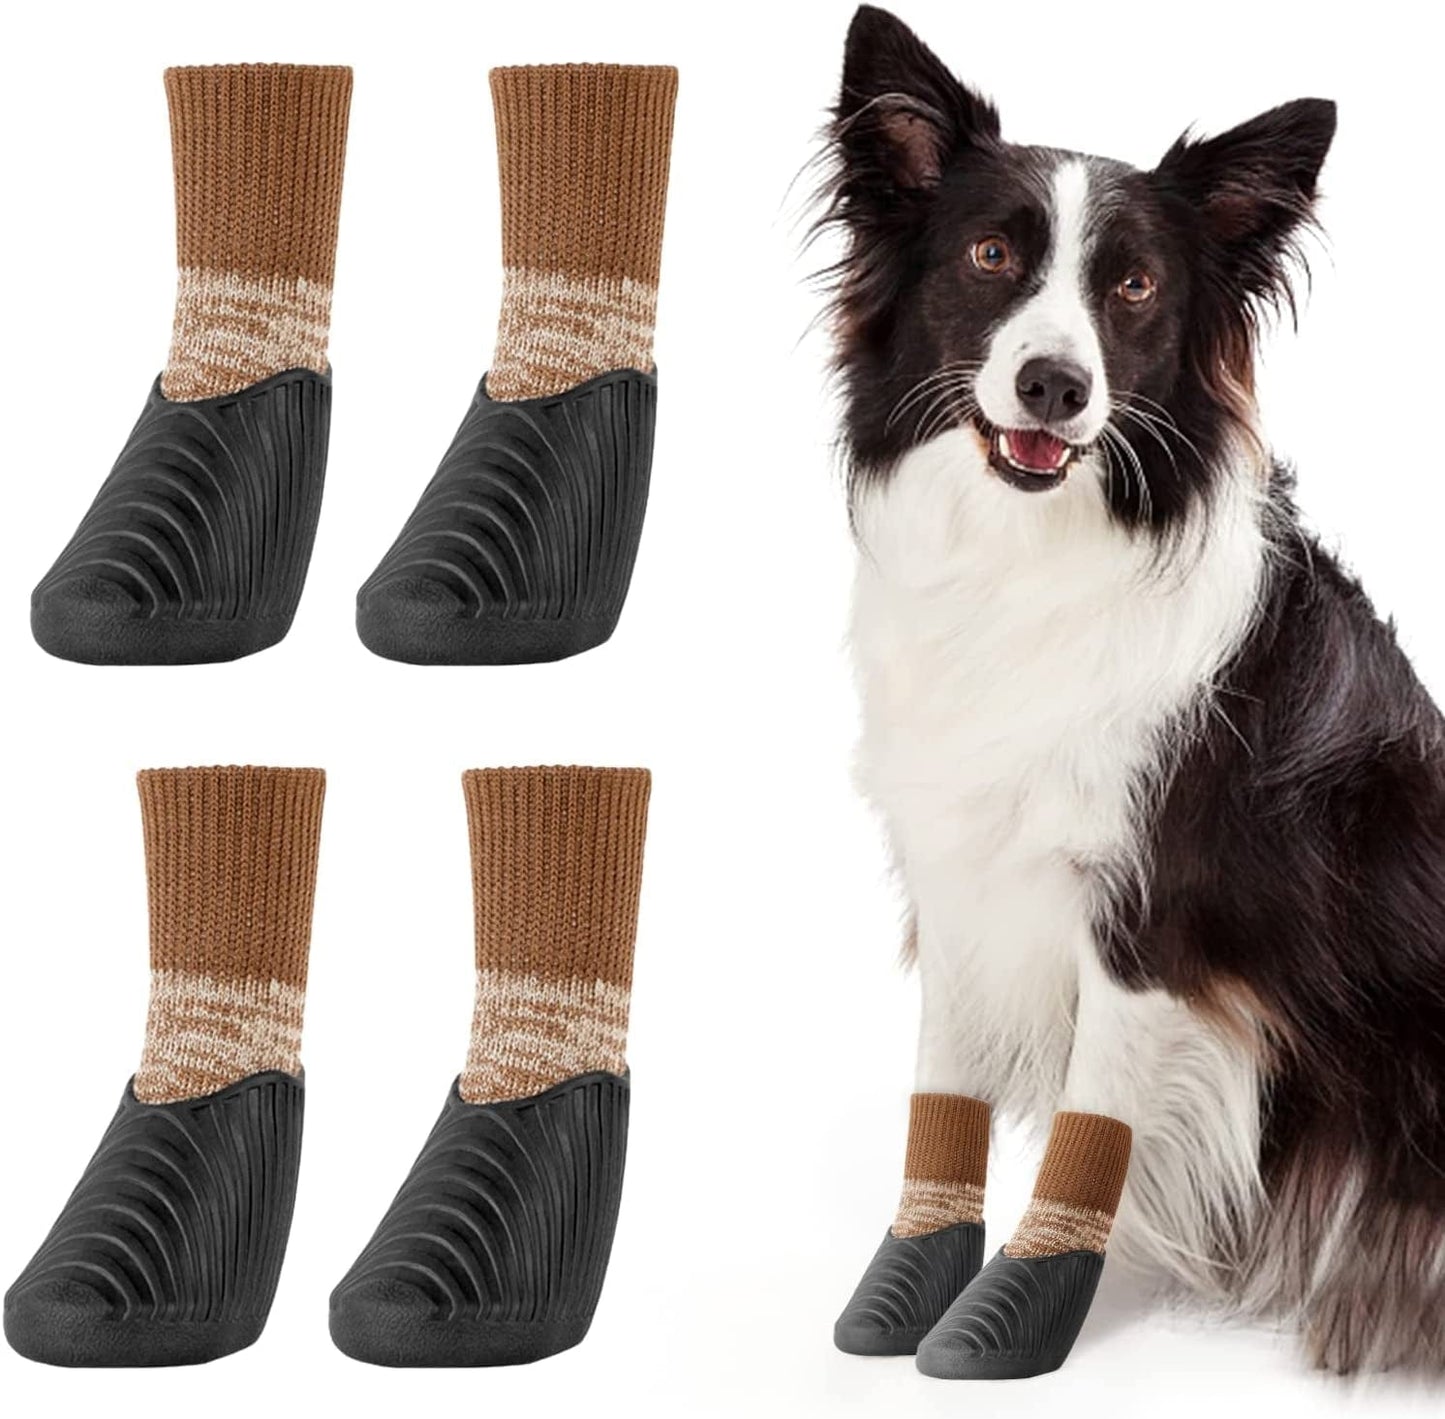 Waterproof Dog Socks Pet Boots Anti-Slip Safety for Dogs Walking Outdoor 6  Sizes